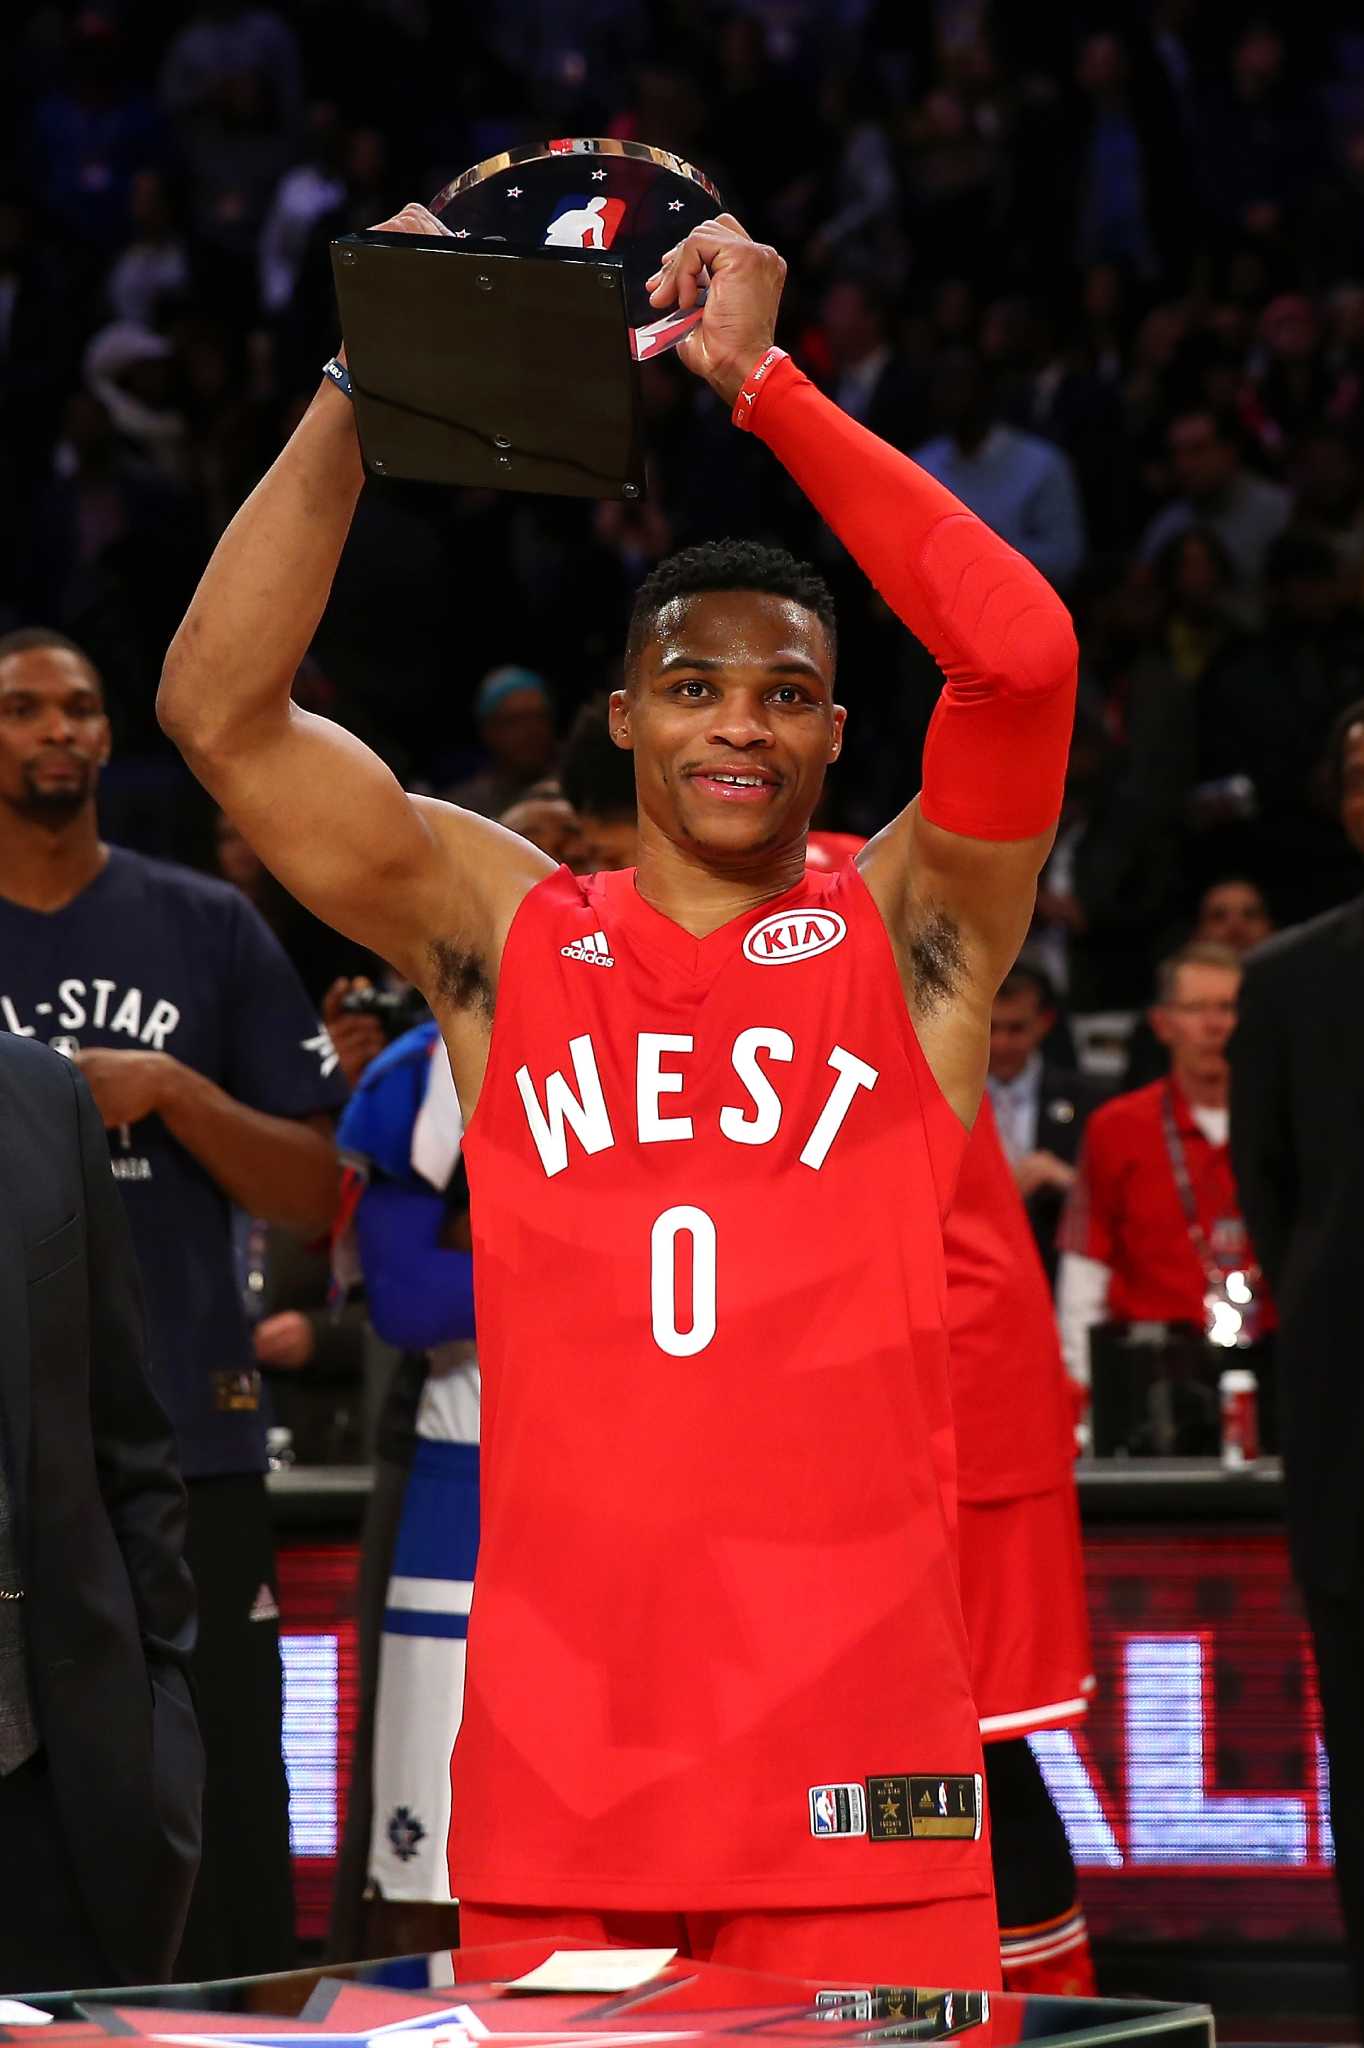 westbrook all star game